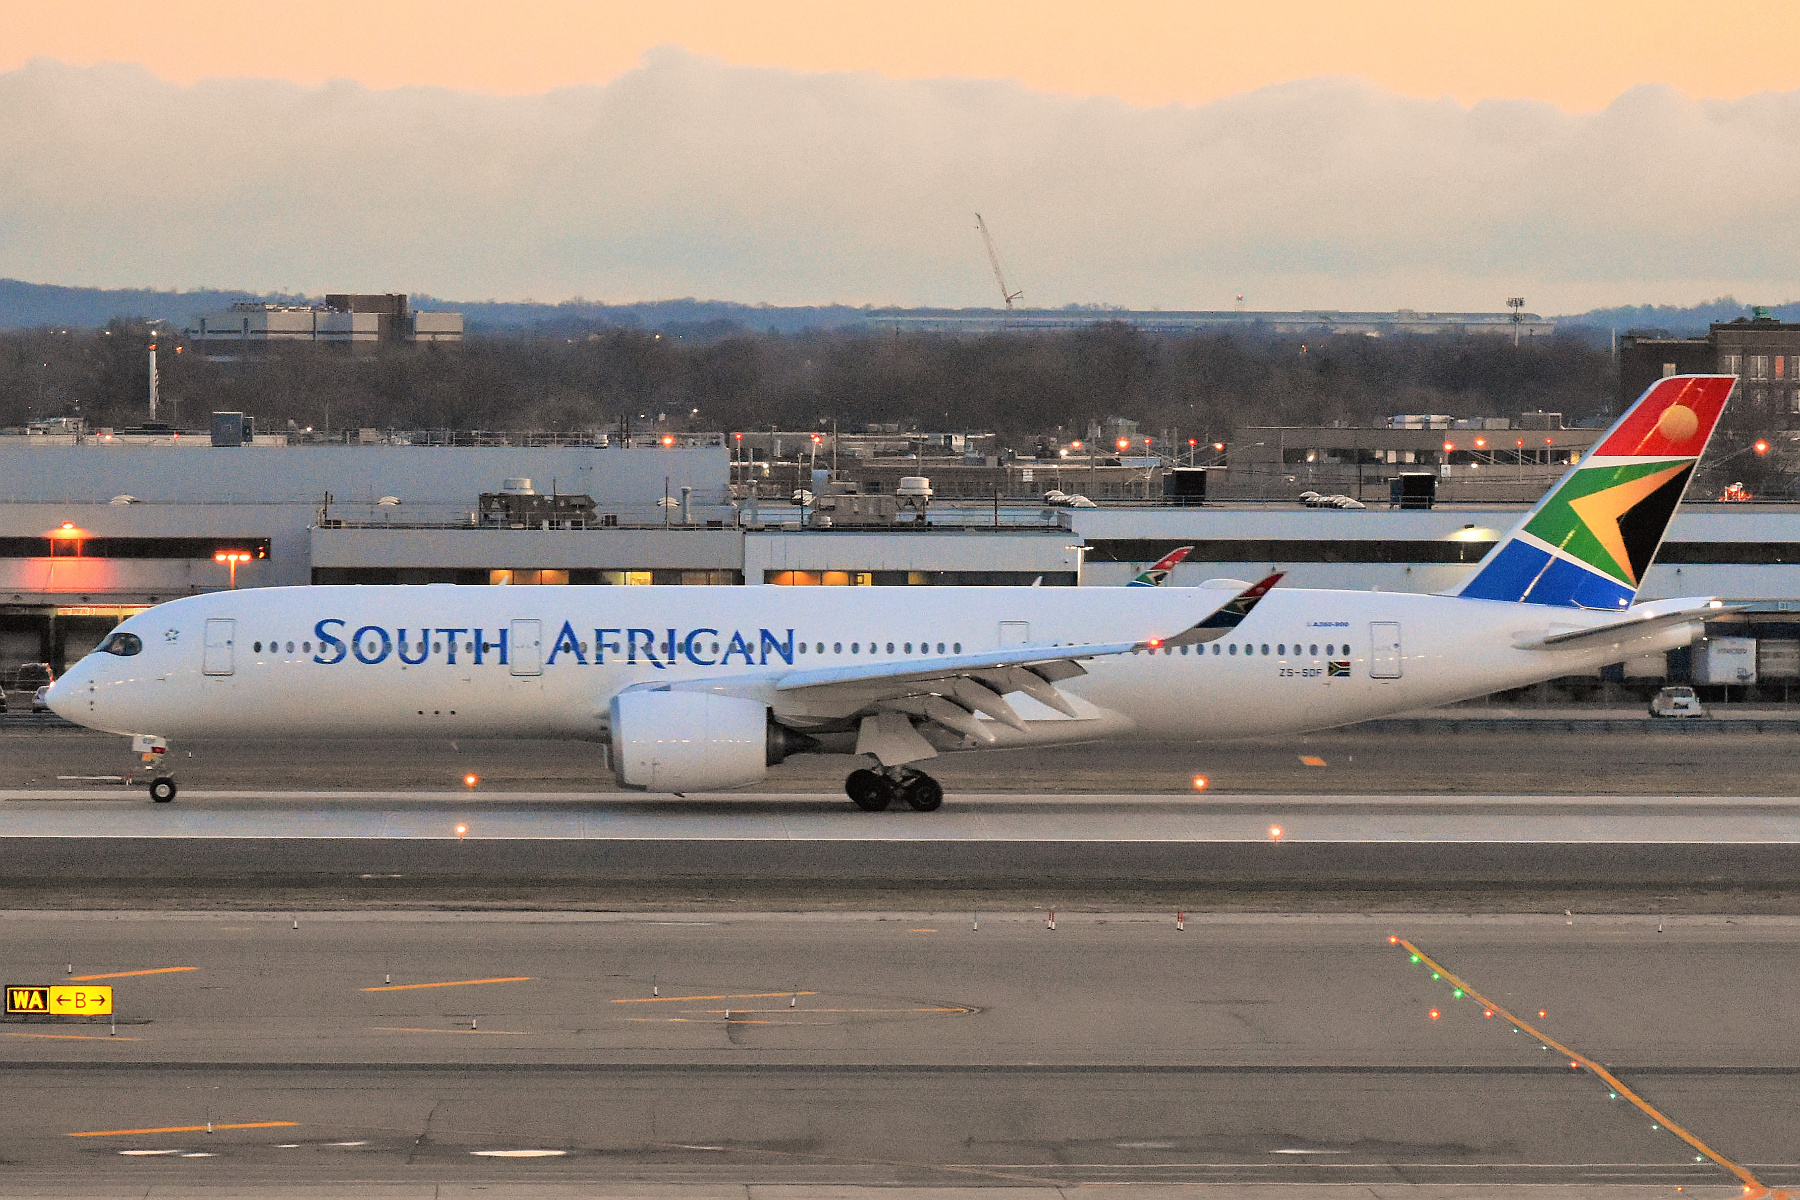 SA’s competitors authority greenlights sale of nationwide airline